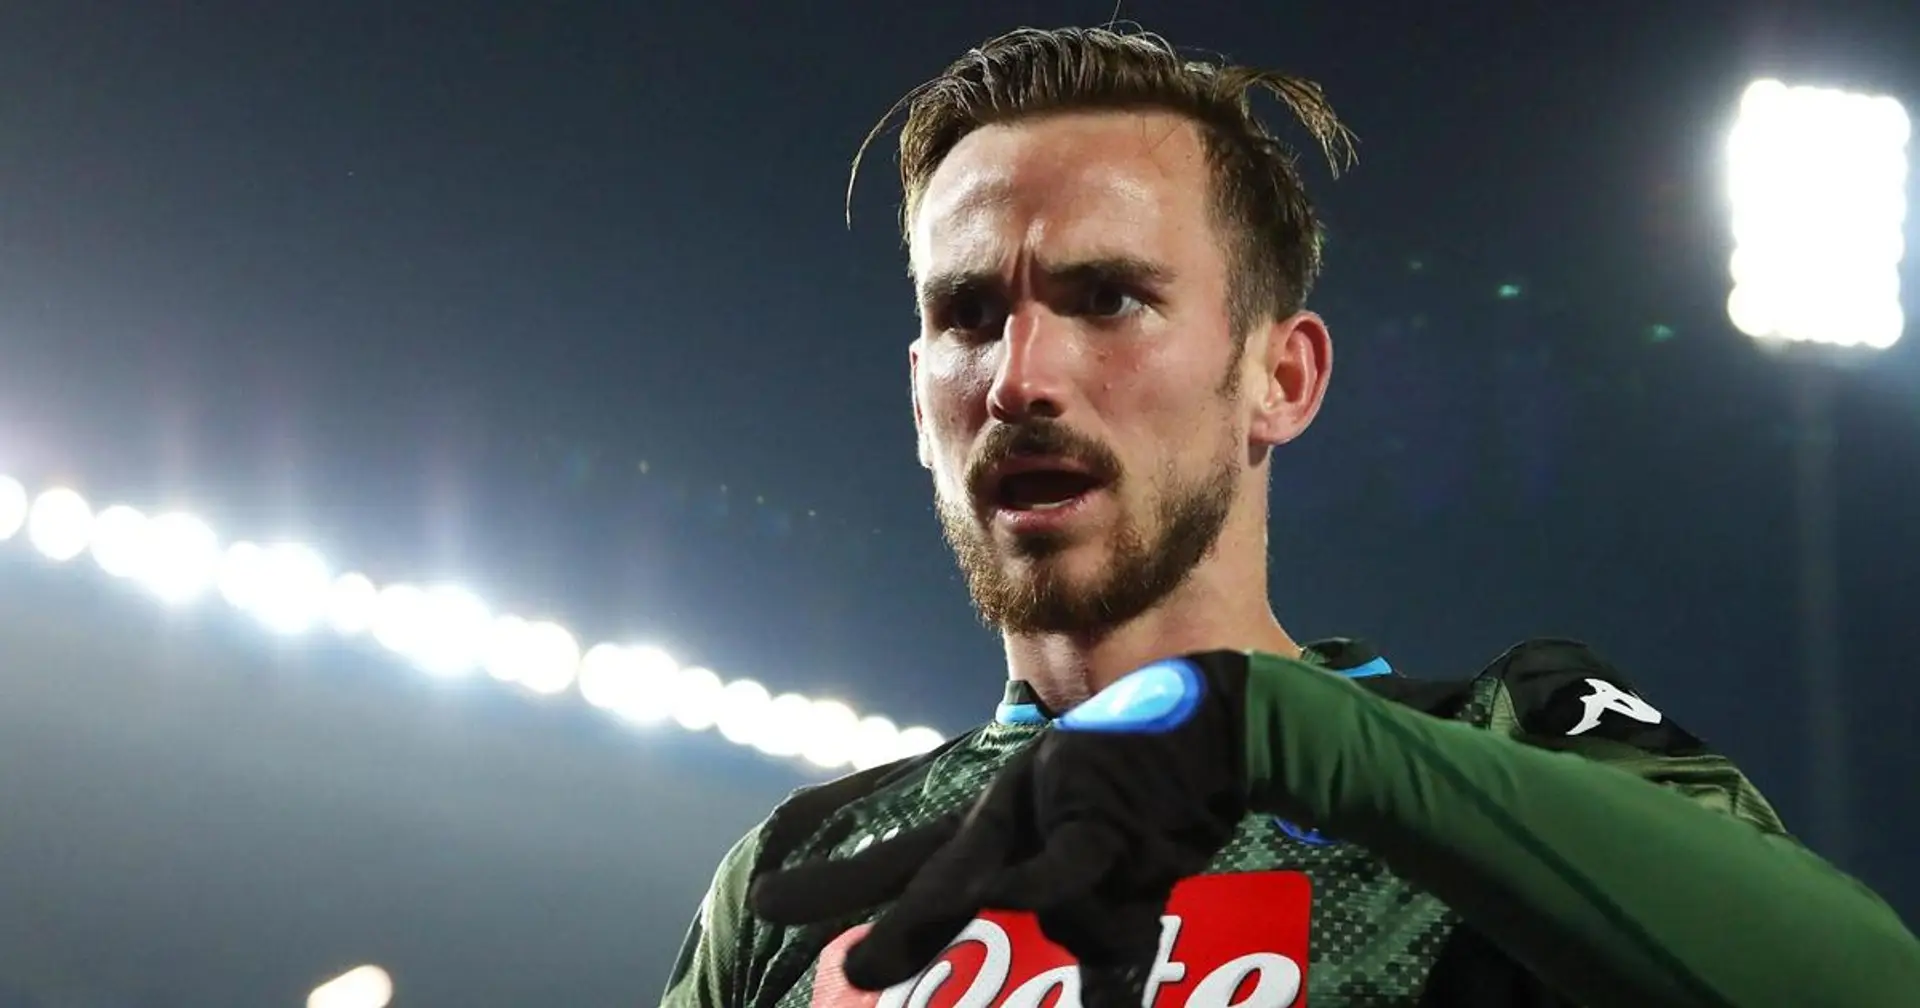 Napoli's sporting director all but rules out Fabian Ruiz's exit amid strong interest from both Barca and Madrid